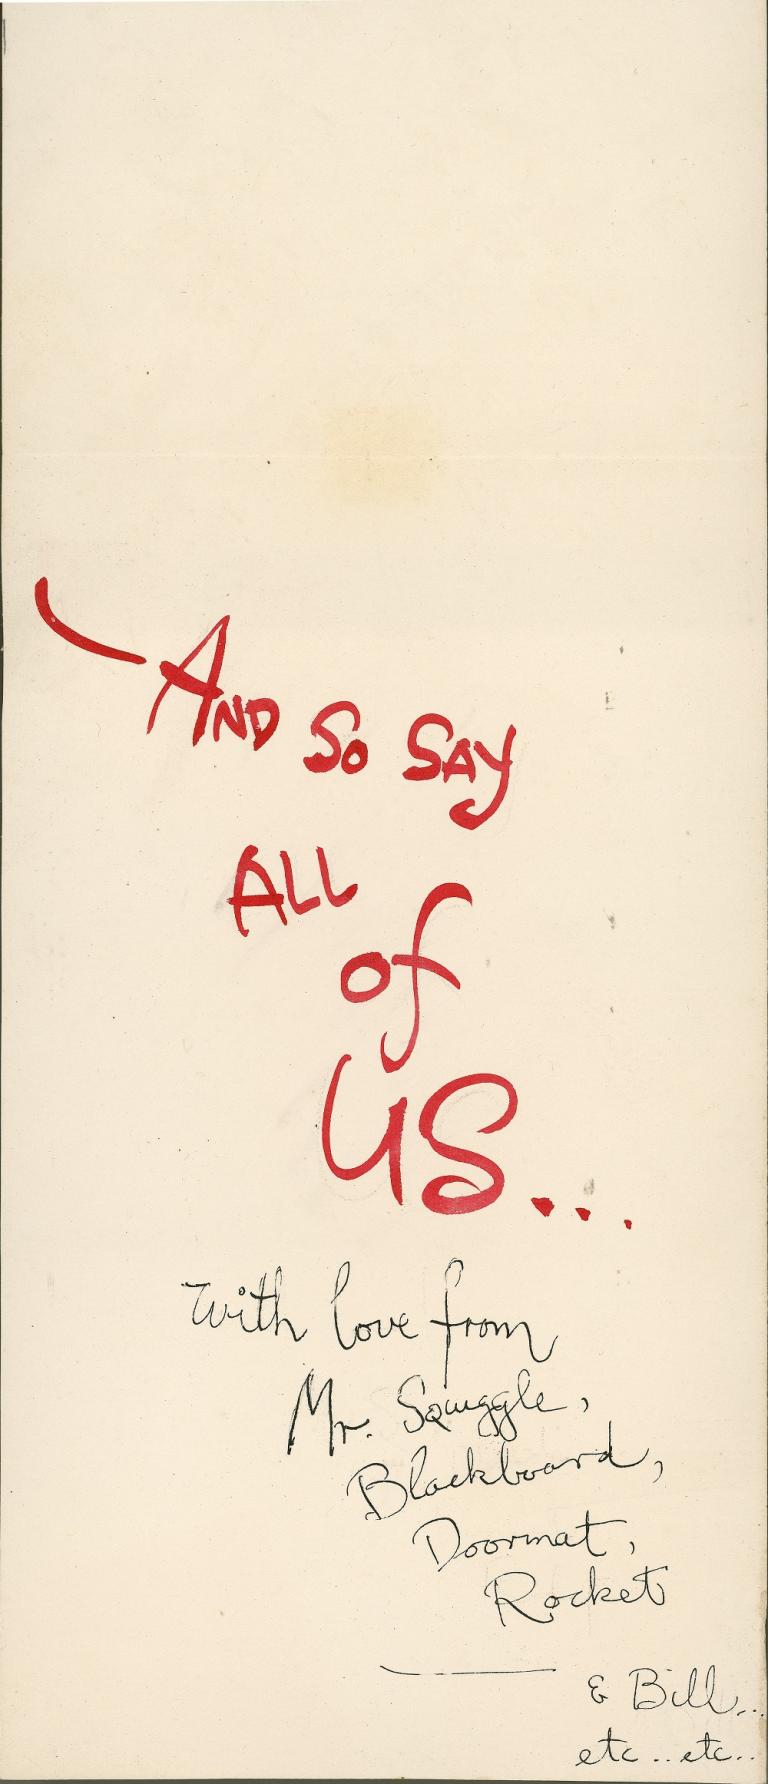 'And so say all of us' written in red then a list of the characters on the Mr Squiggle show